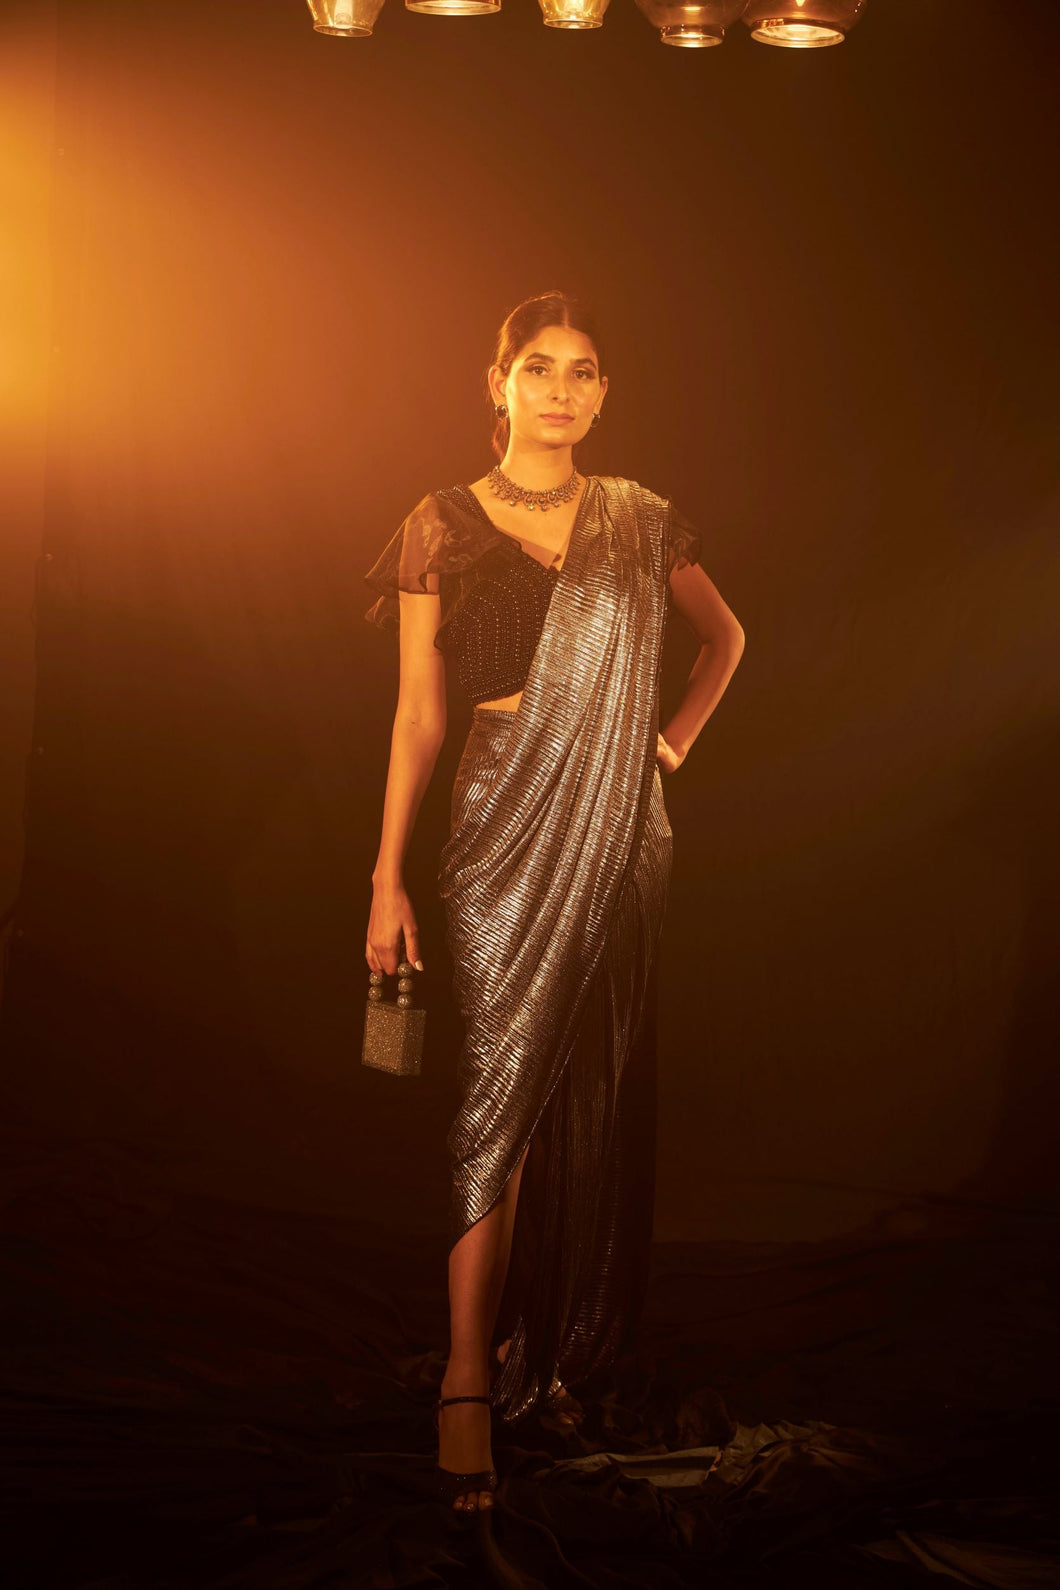 Saia metallic slit saree with an embellished pearl blouse will definitely make you look sassy and elegant in an event.  Tailored to perfection in a metallic fabric, the saree features a slit from the waist level and has an attached palla which creates a great fall.  It comes with a pearl embellished blouse with a deep V-neckline and ruffle sleeves in organza and deep from the back.